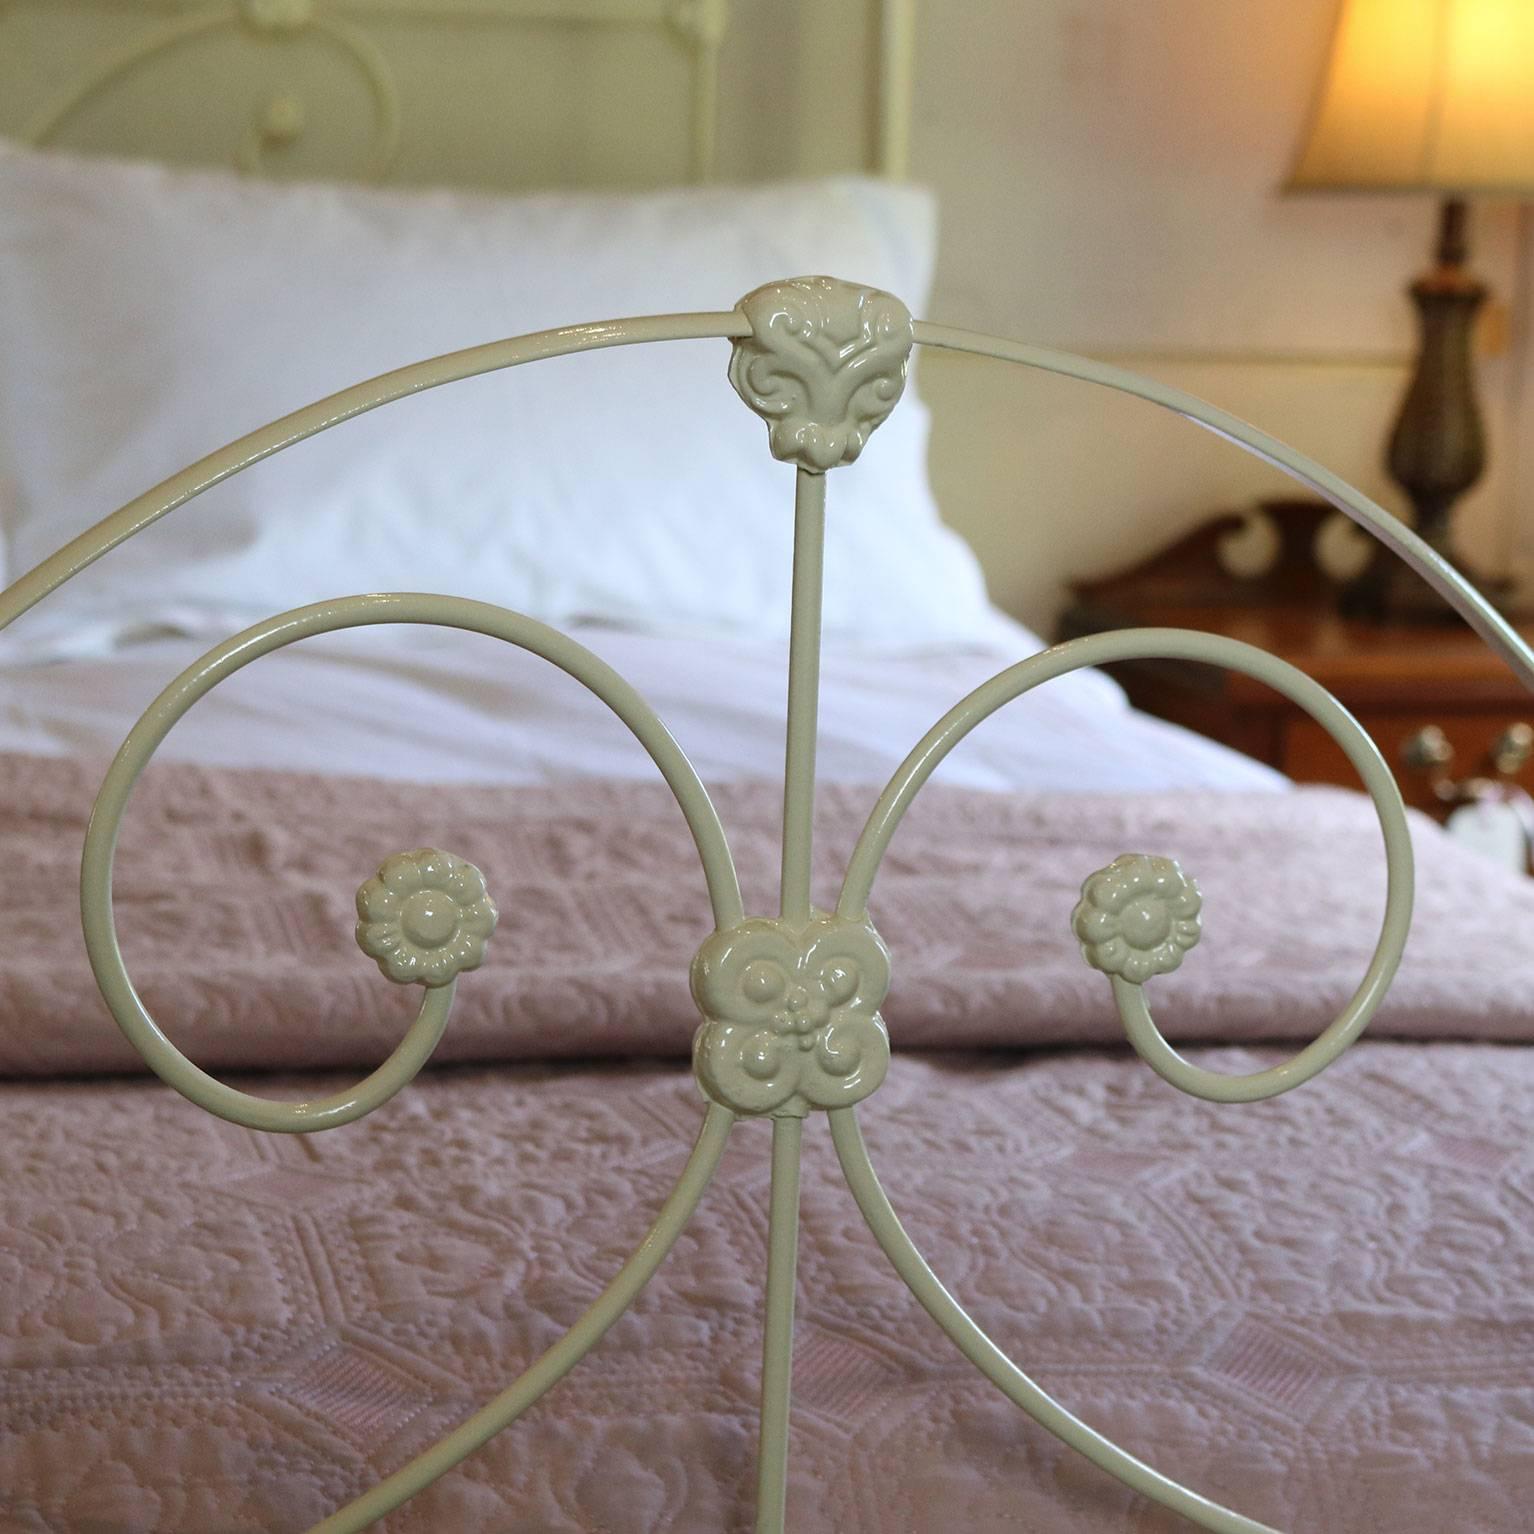 Cast Iron and Brass Bed MK111 1